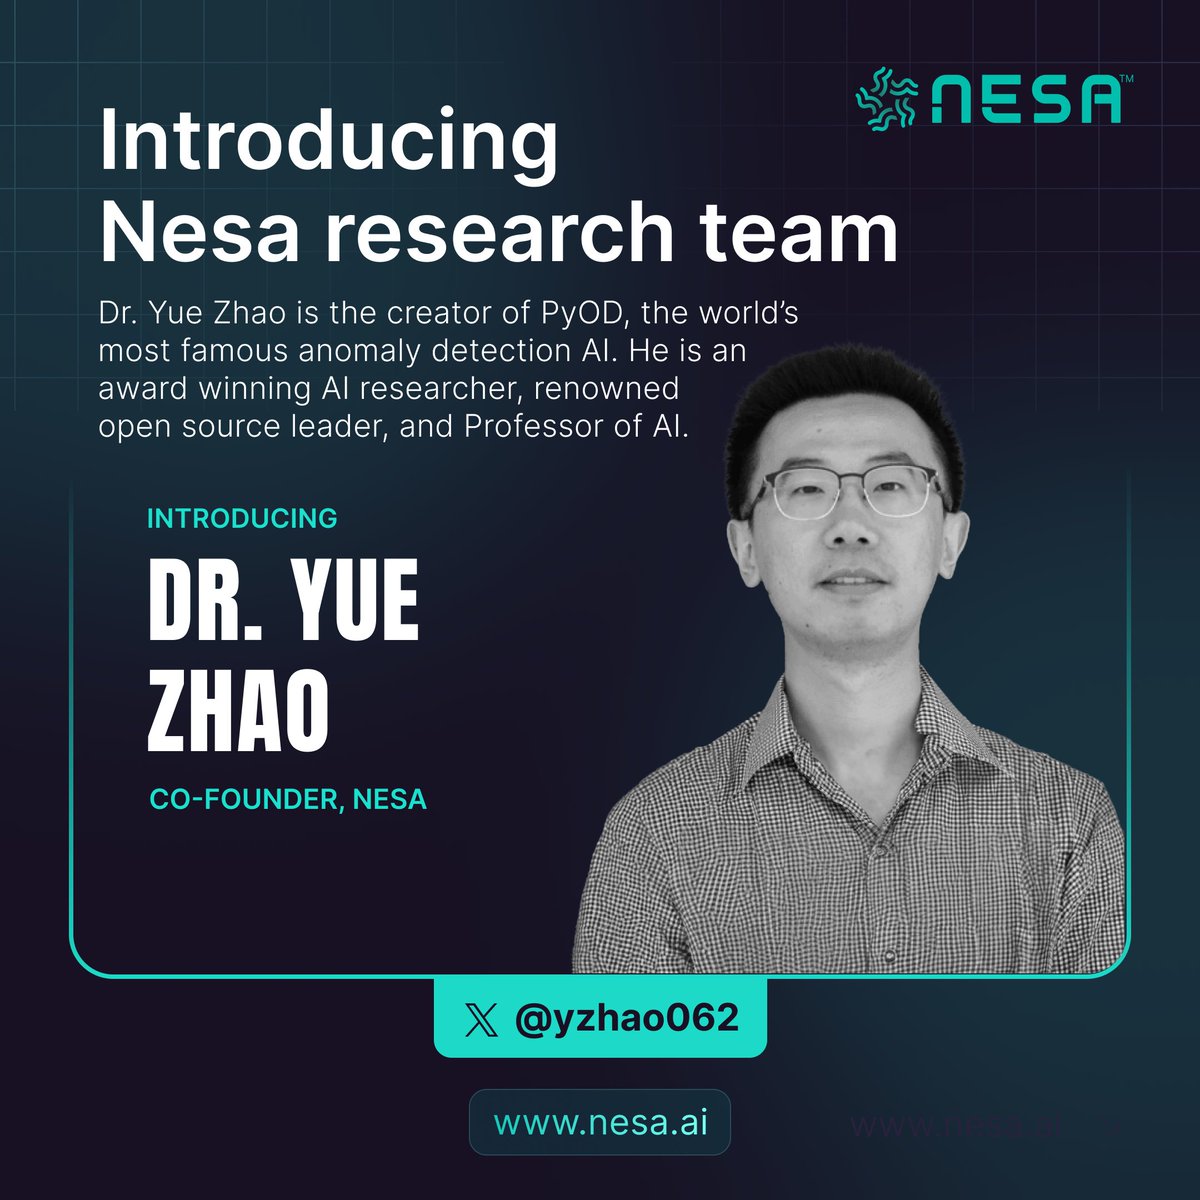 Introducing Cofounder of Nesa, Dr. Yue Zhao. Dr. Zhao is the creator of PyOD, the most famous anomaly detection AI in the world, used in Tesla vehicles and NASA. Previously, Dr. Zhao created a number of successful open-source ML projects that have amassed over 20,000 Github stars…